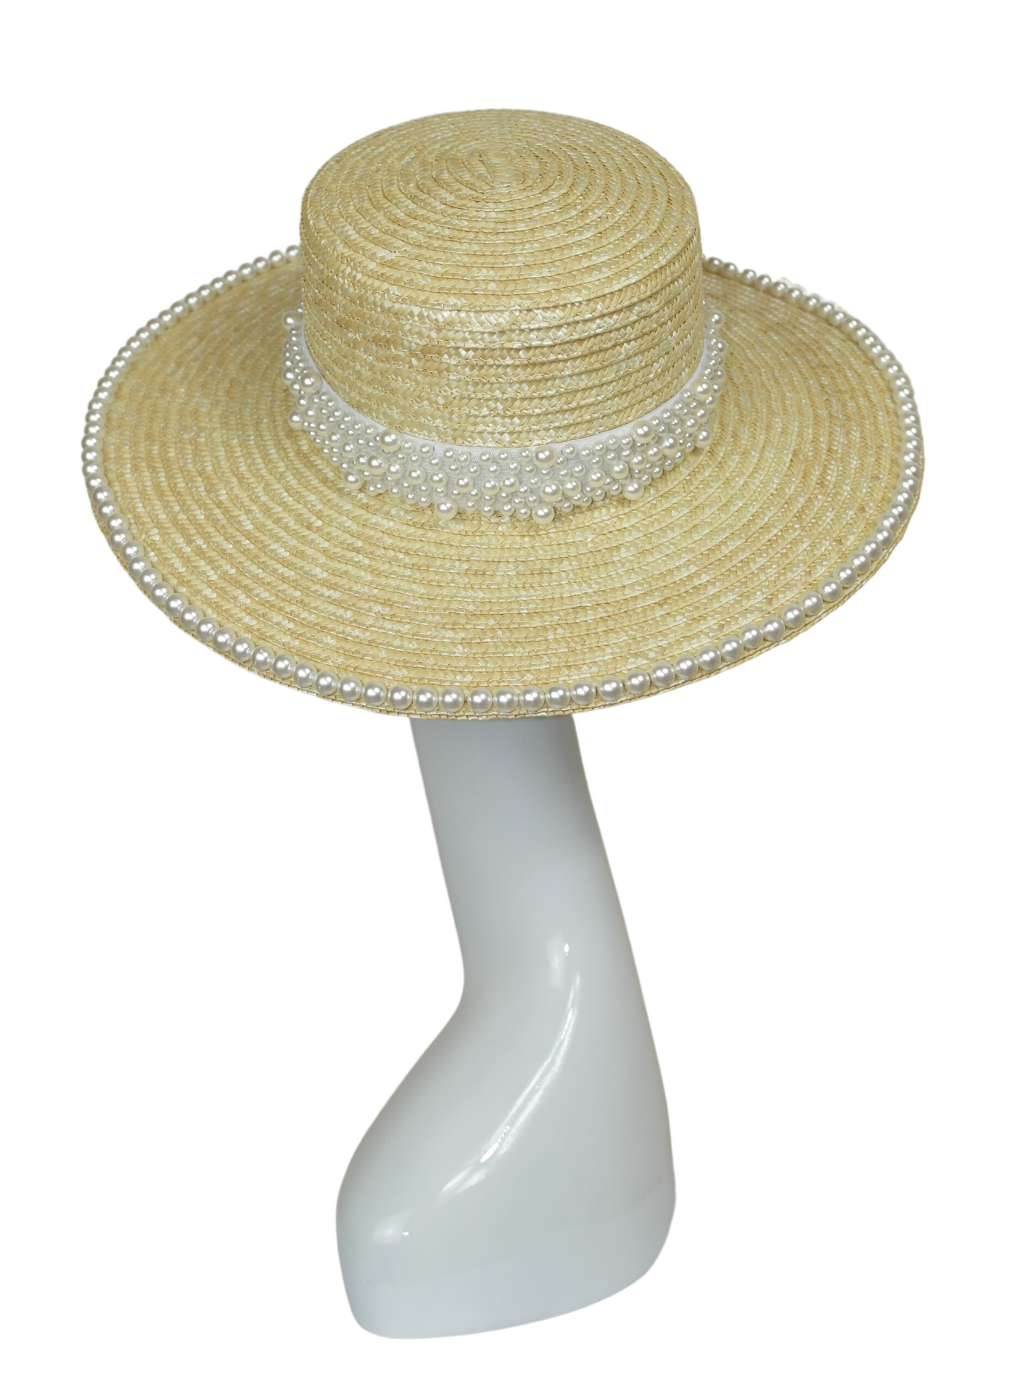 Pearl Straw sun hat for the beach vaccation essential